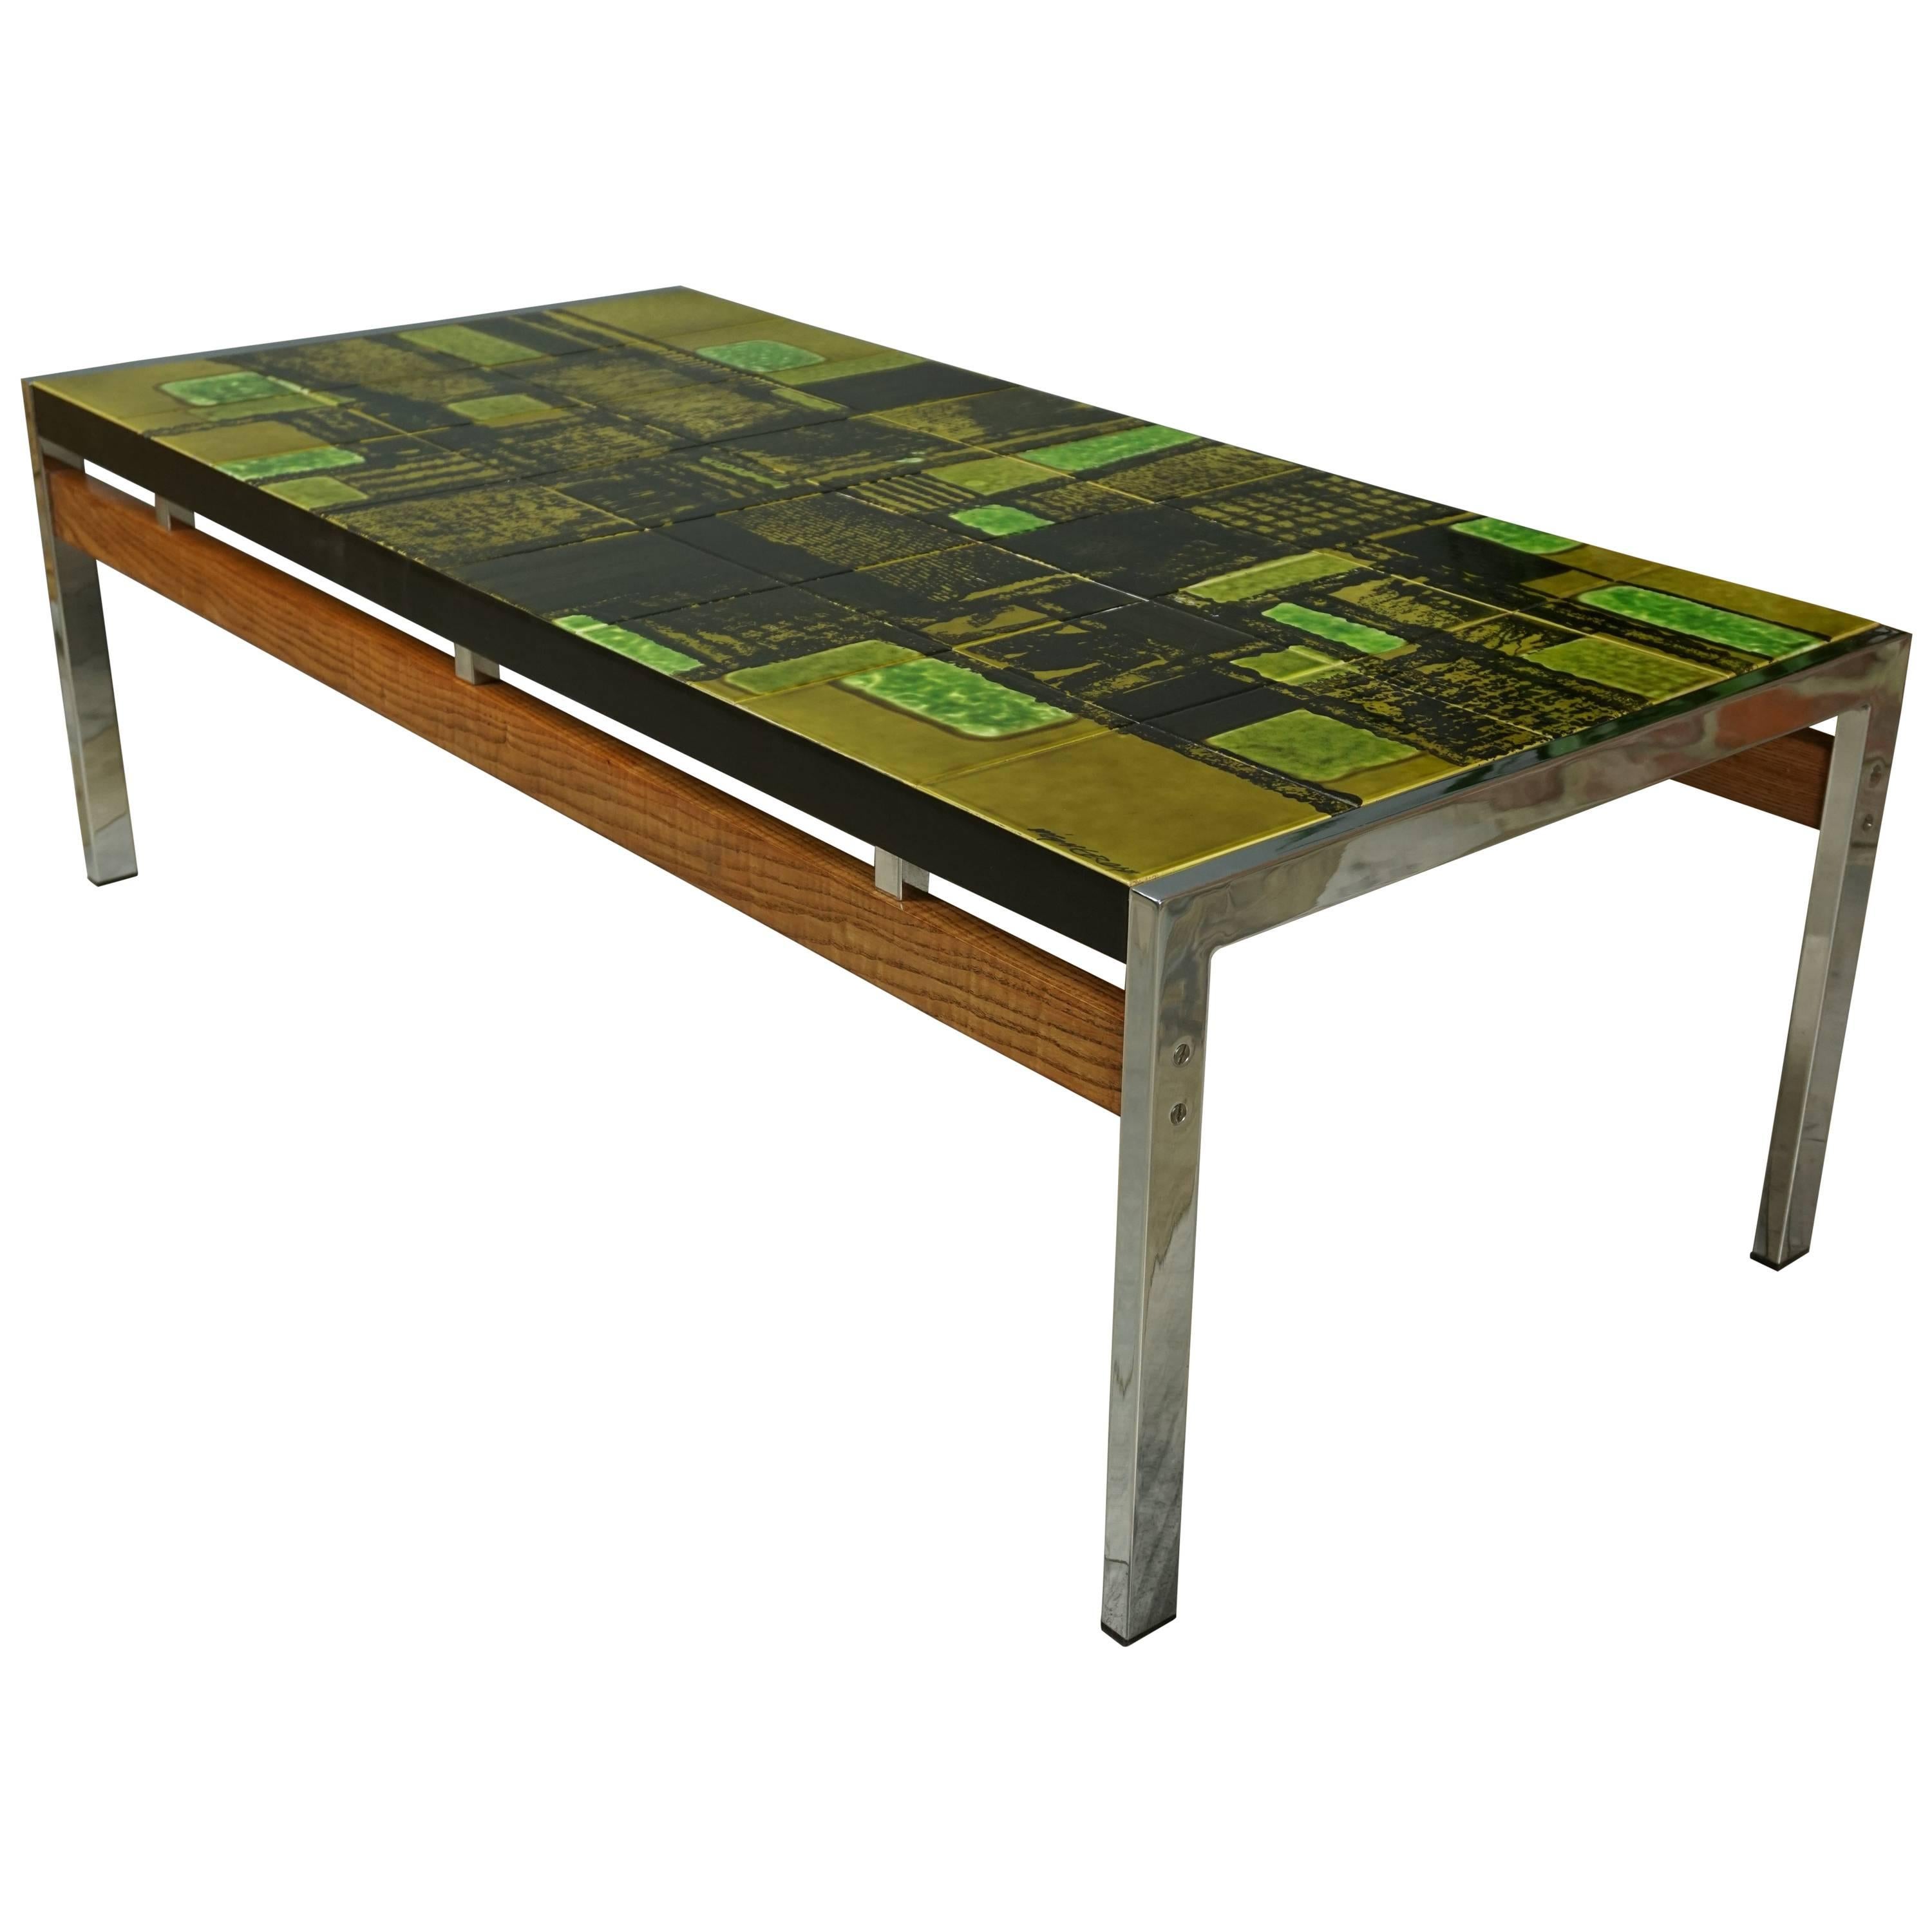 Important Dutch Design Of The 50s Ceramic Chrome And Wood Coffee Table 